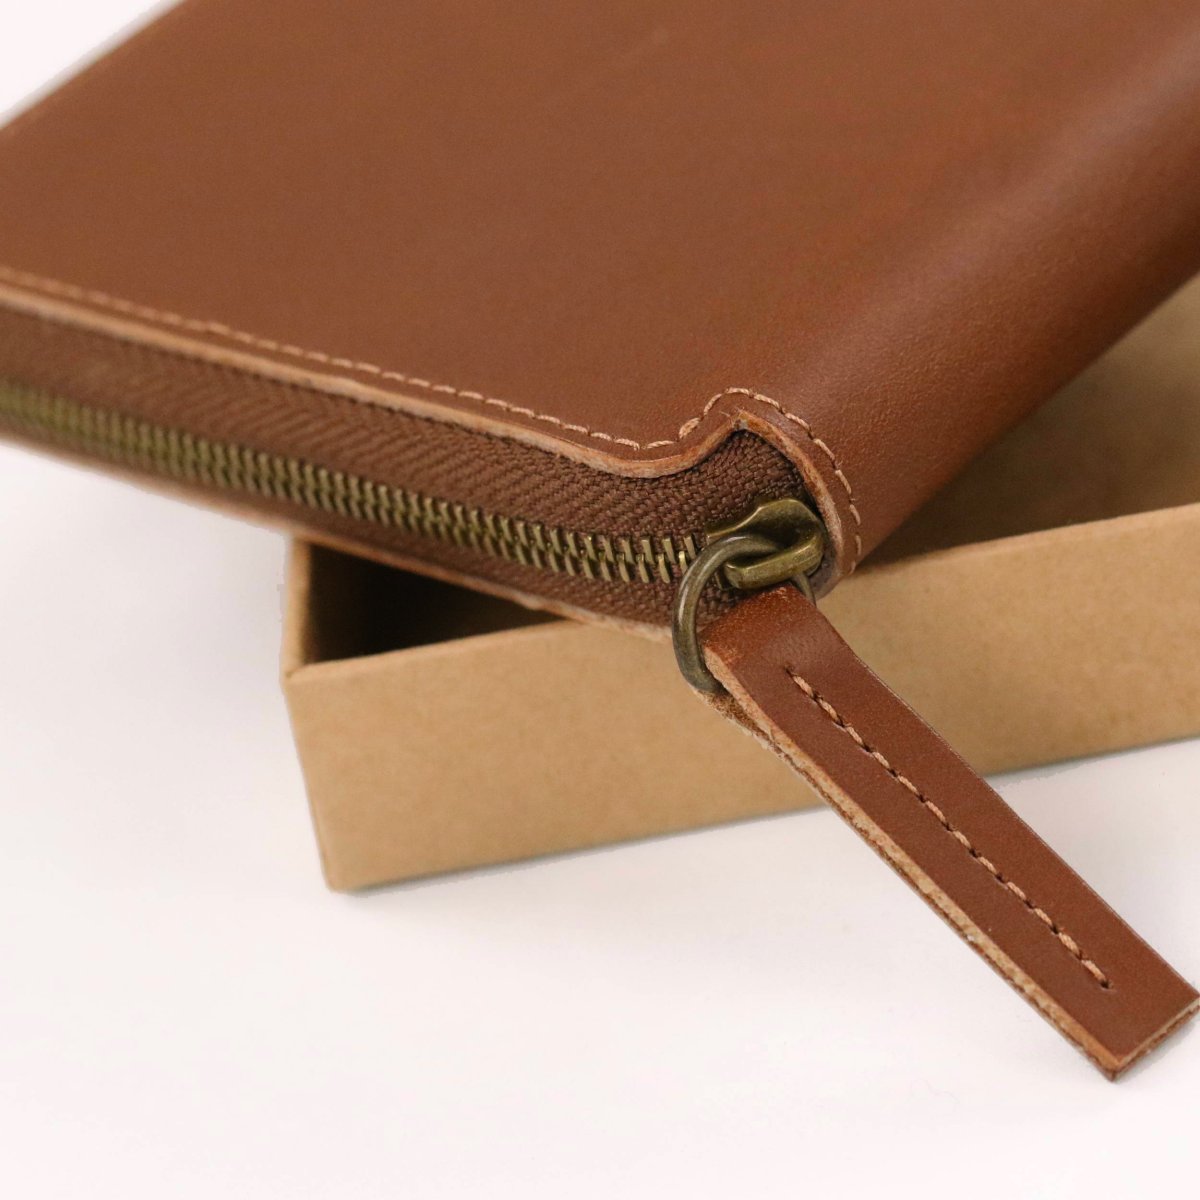 Zipped leather wallet